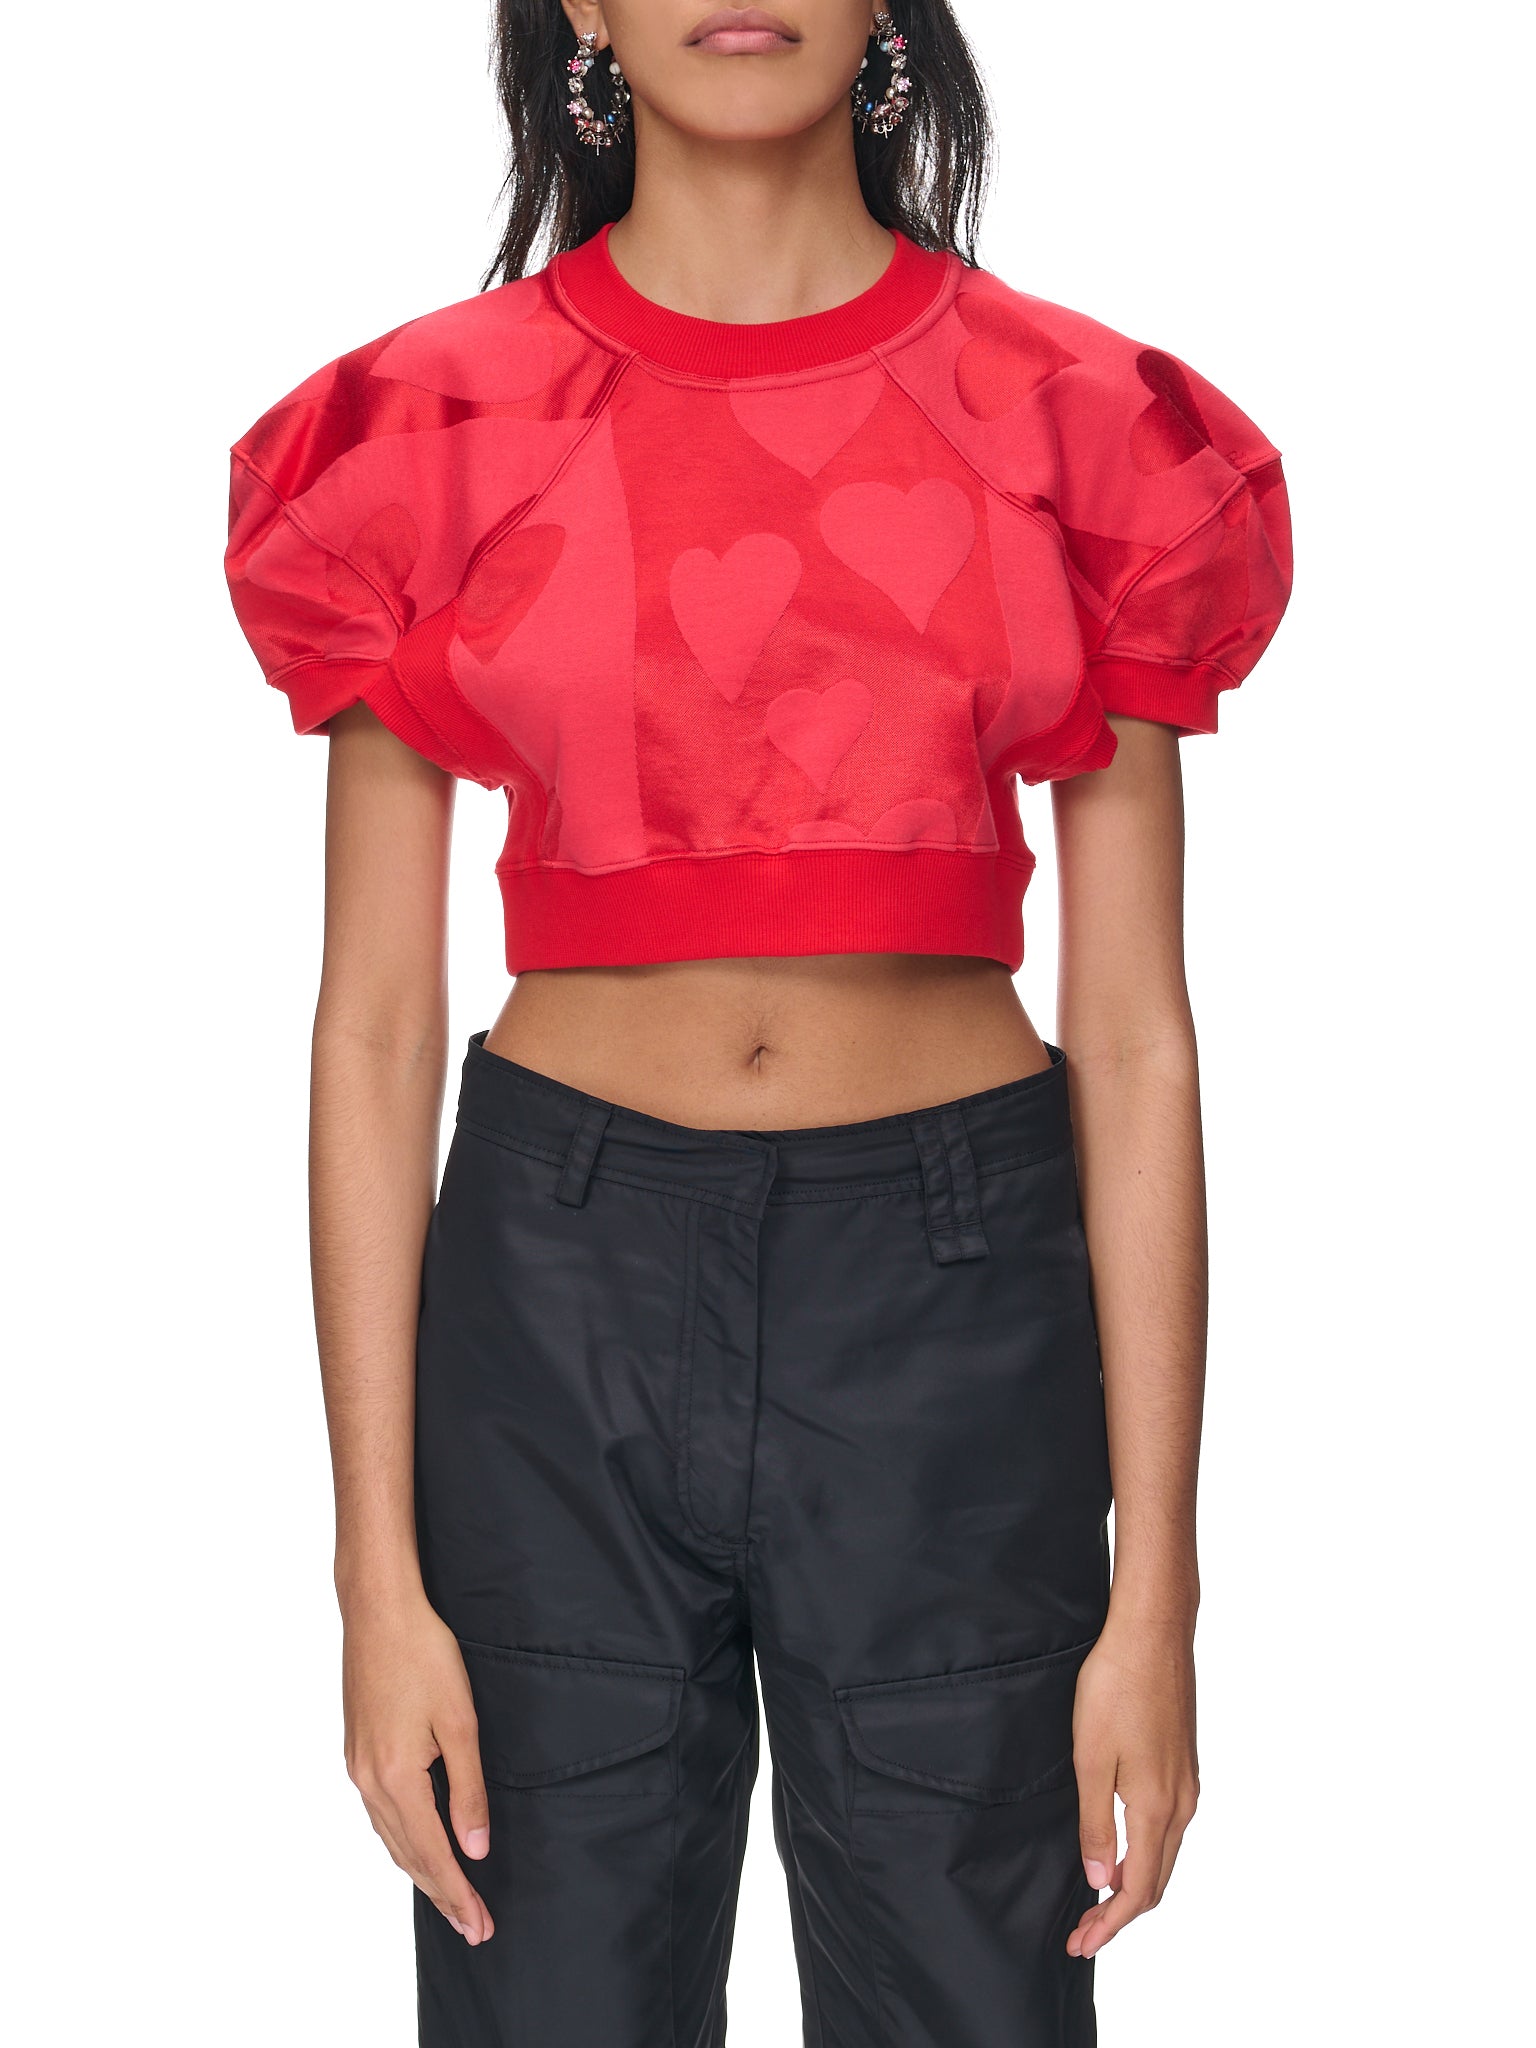 Cropped Hearts Top (1I010007-J0047-G0-H202-RED-HEA)